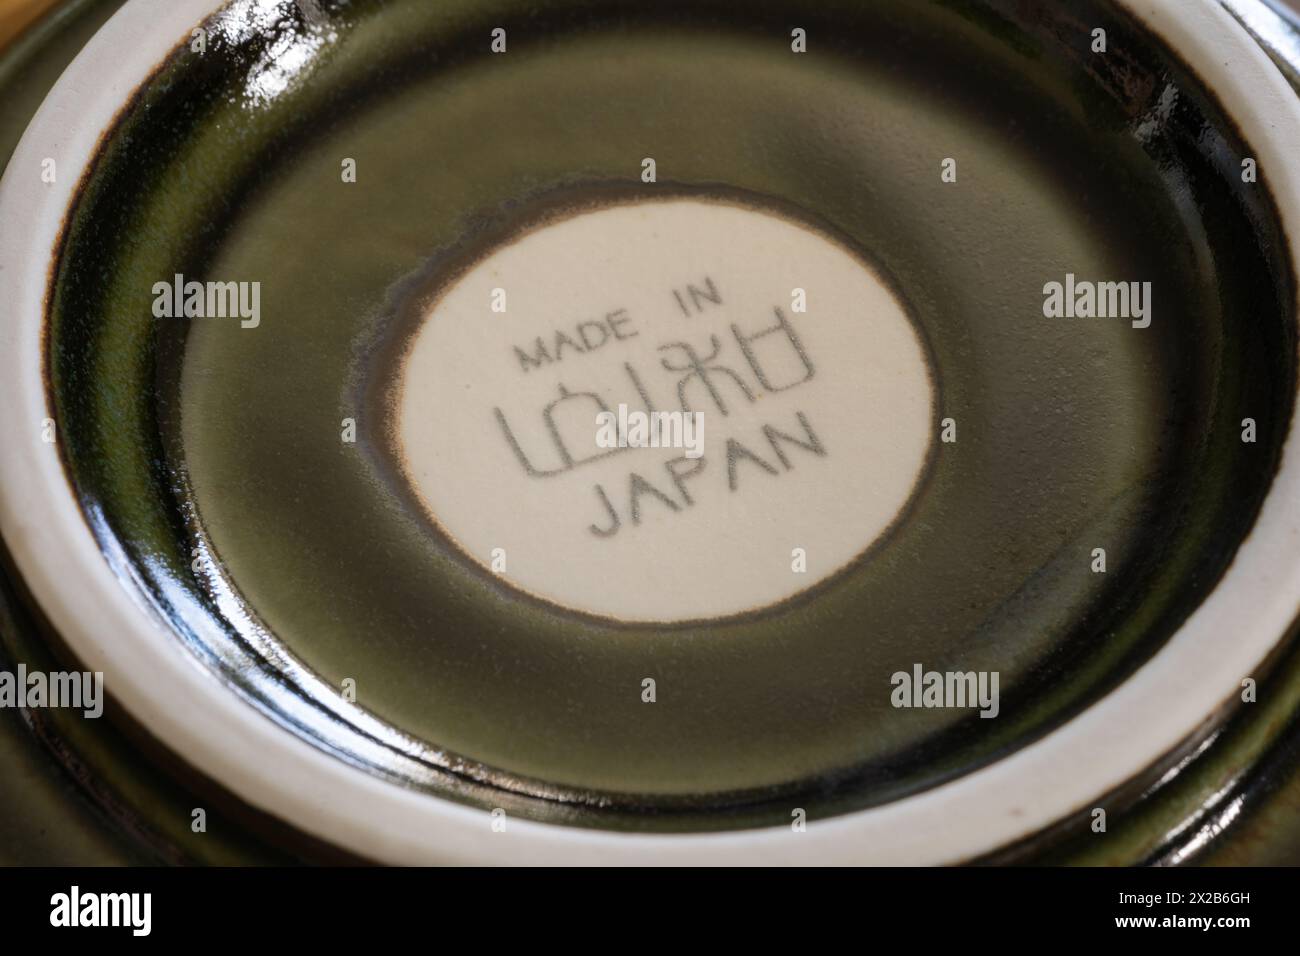 An Asian style bowl with a Made in Japan and Japanese characters mark / label on the base, UK. Concept: Japanese exports, Japan manufacturing Stock Photo